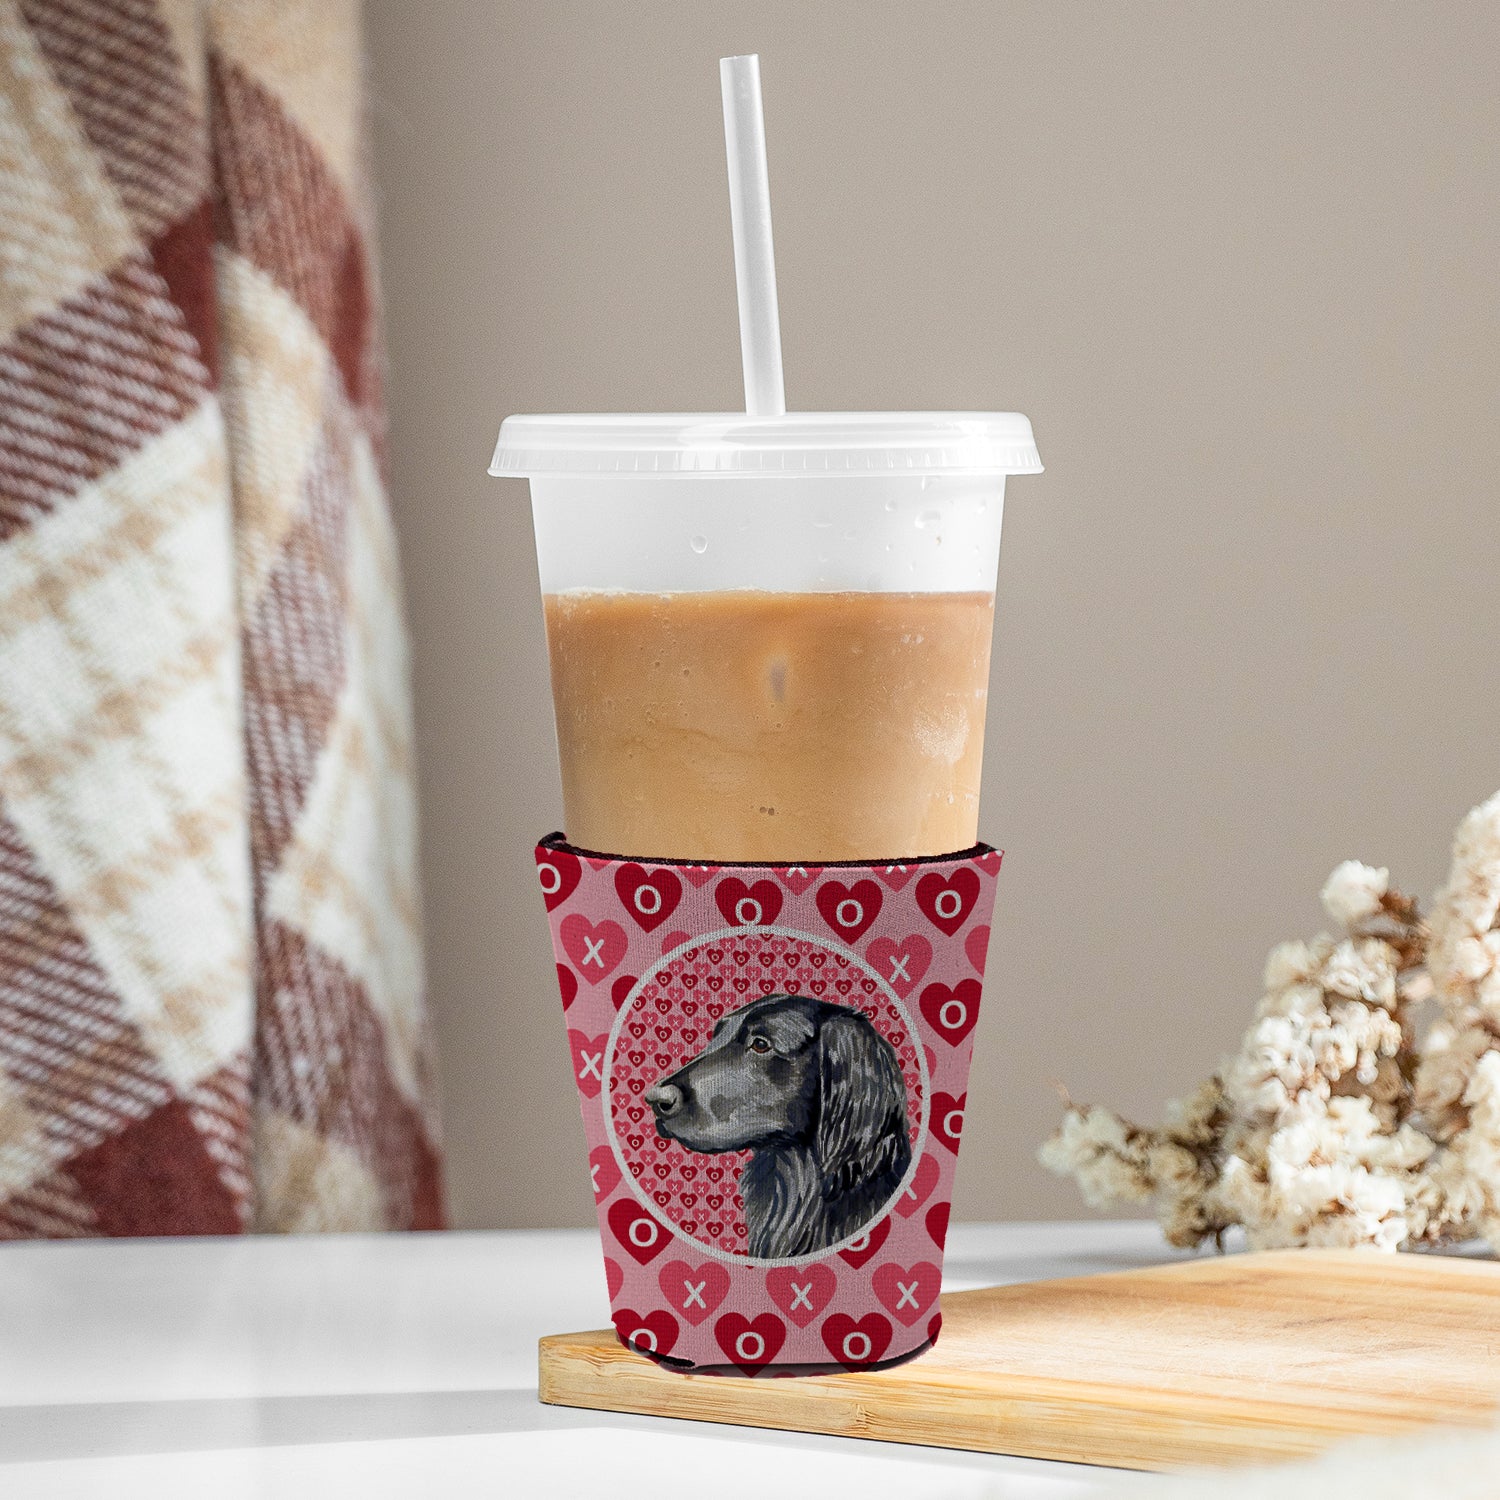 Flat Coated Retriever Valentine's Love and Hearts Red Cup Beverage Insulator Hugger  the-store.com.